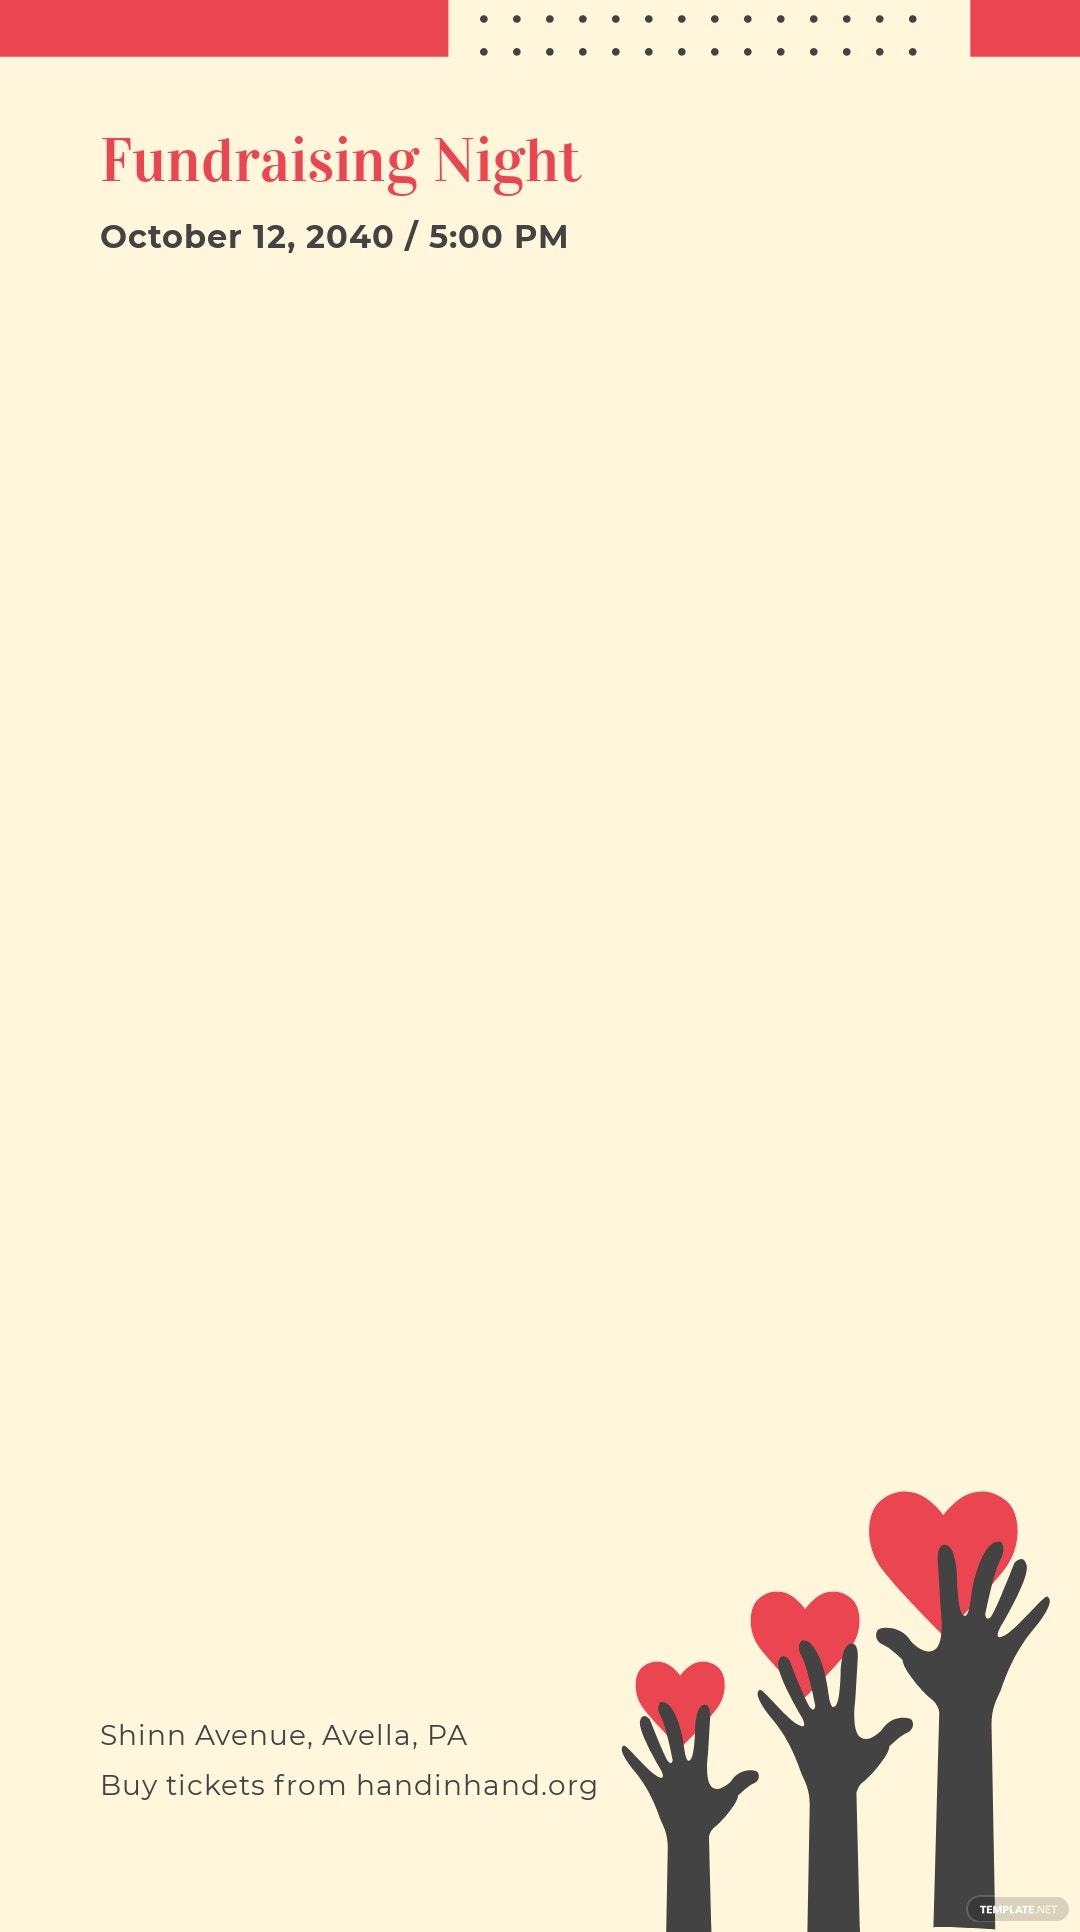 charity event snapchat geofilter